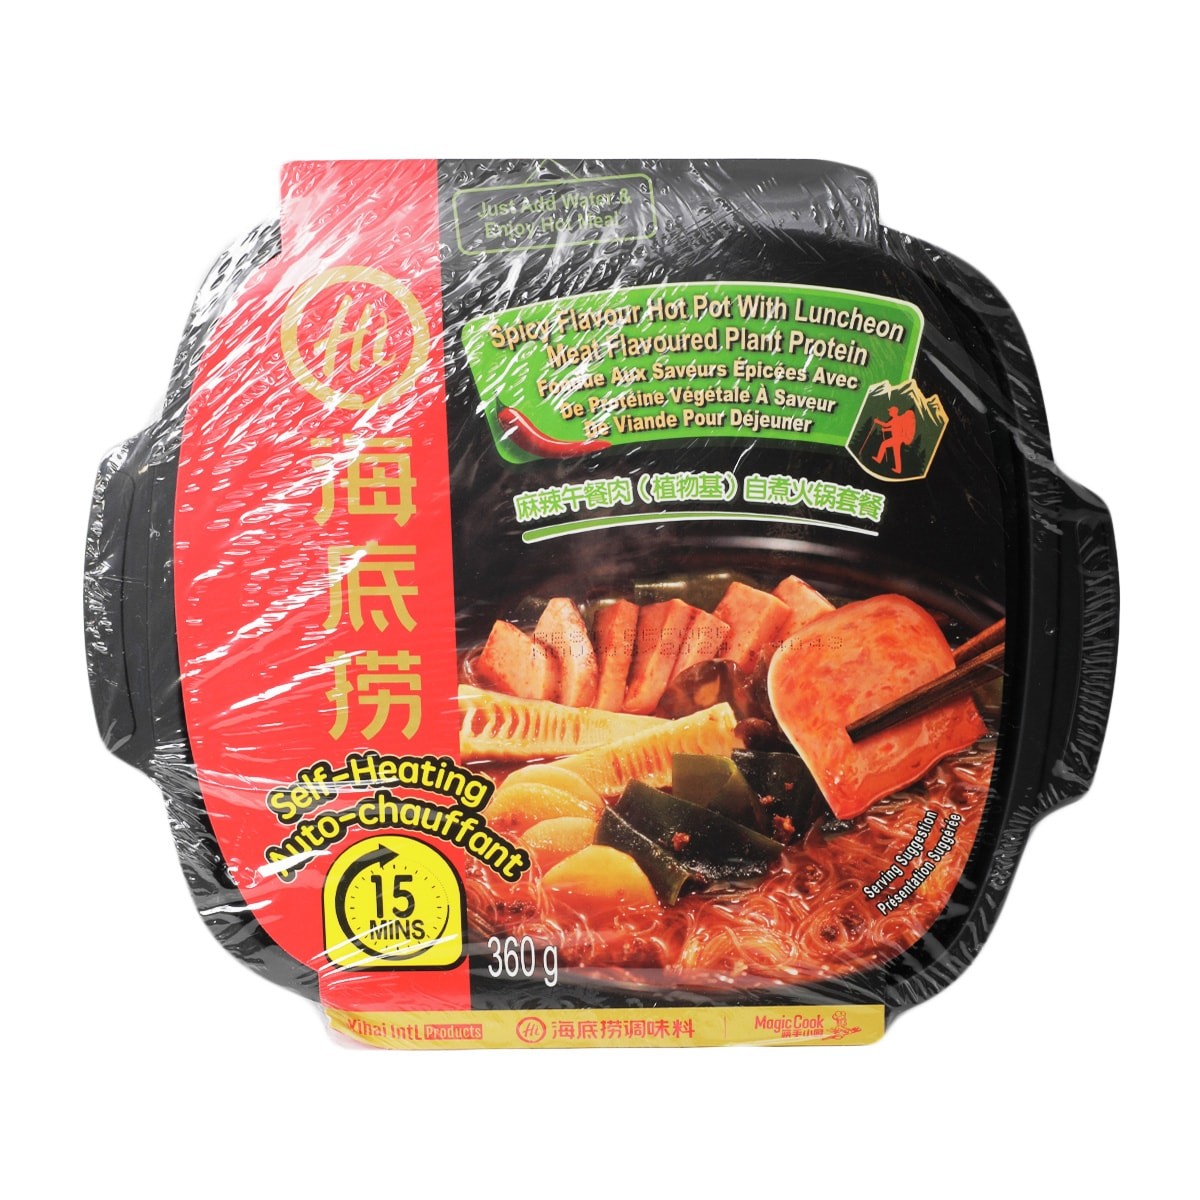 haidilao-spicy-flavour-hot-pot-with-luncheon-plant-protein